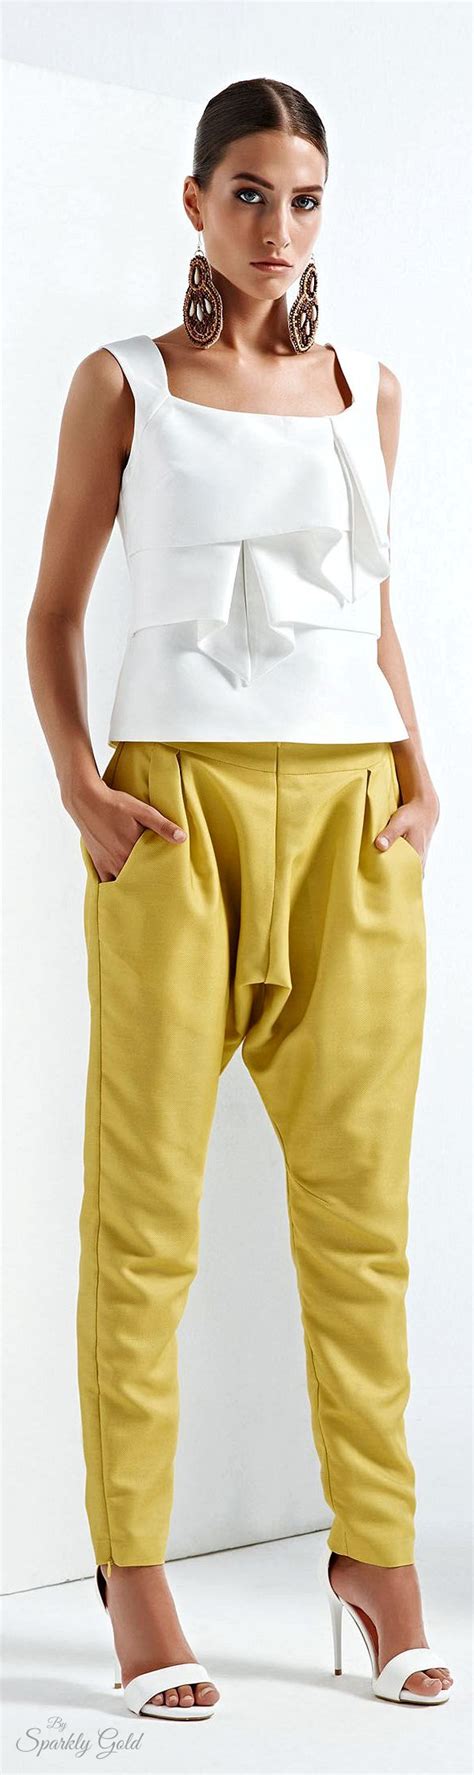 How To Prevent Camel Toeing In Workout Pants Unugtp News